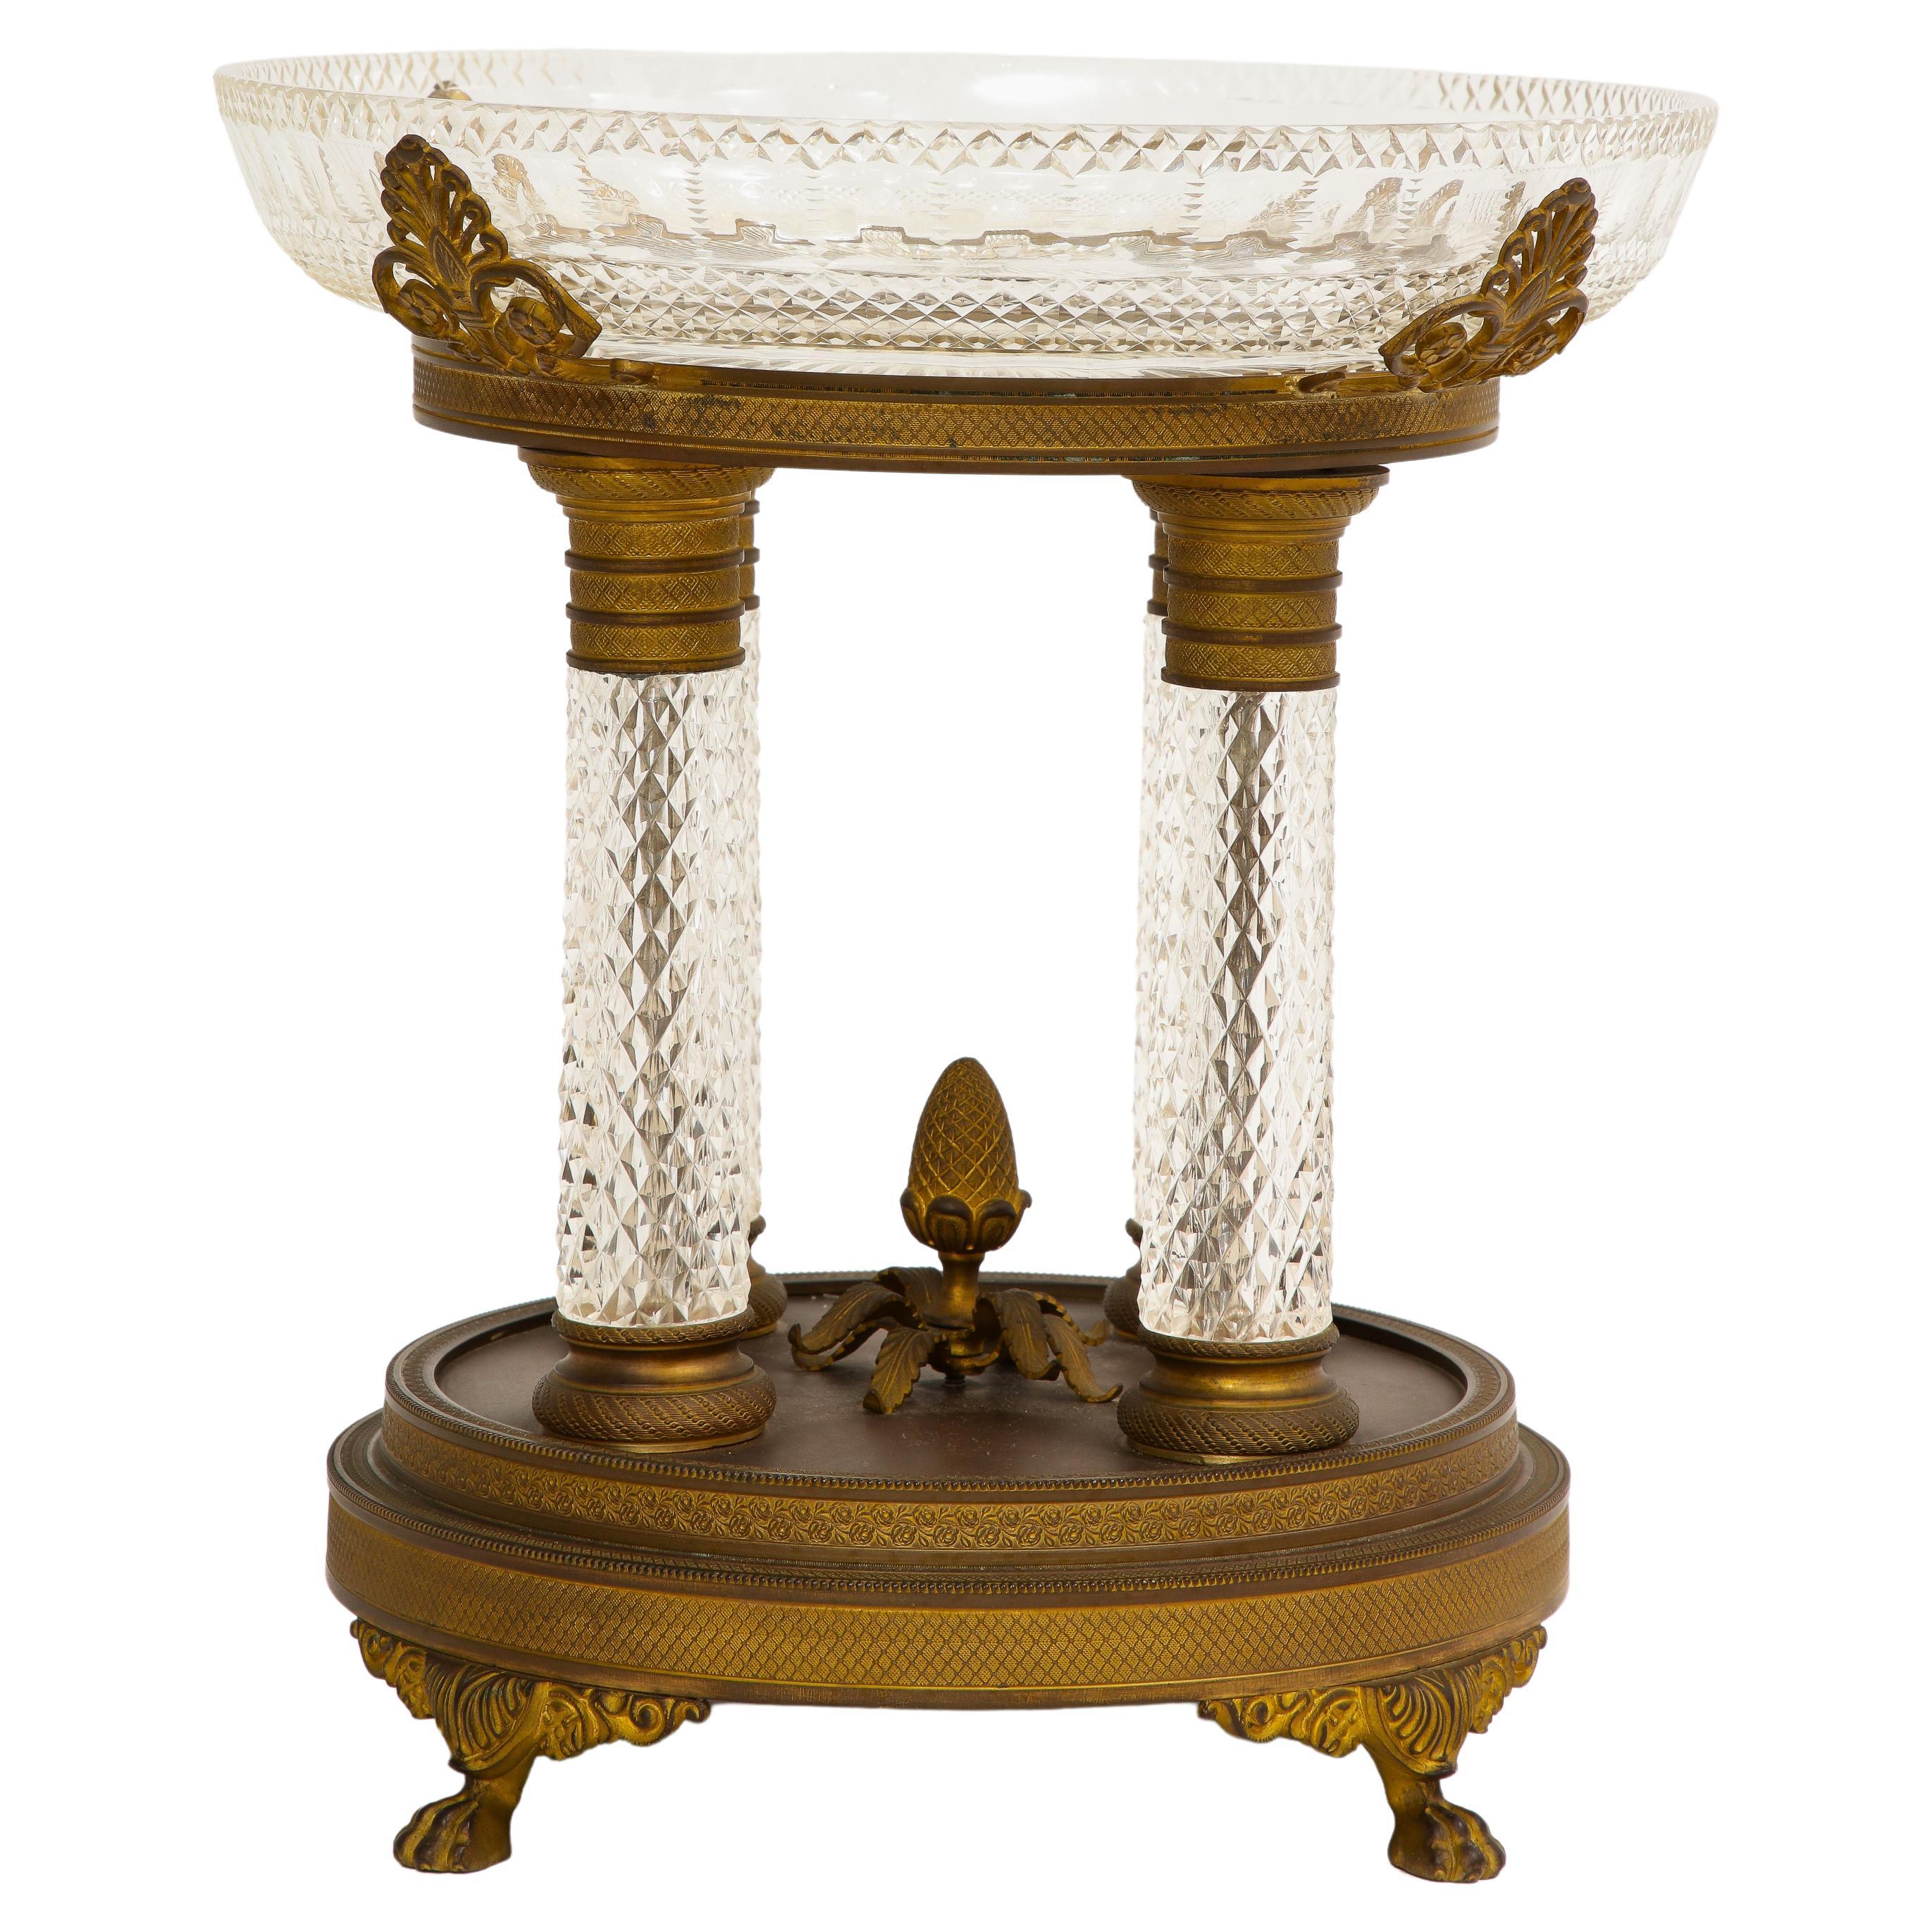 19th Century French Baccarat Ormolu Mounted Crystal Centerpiece For Sale